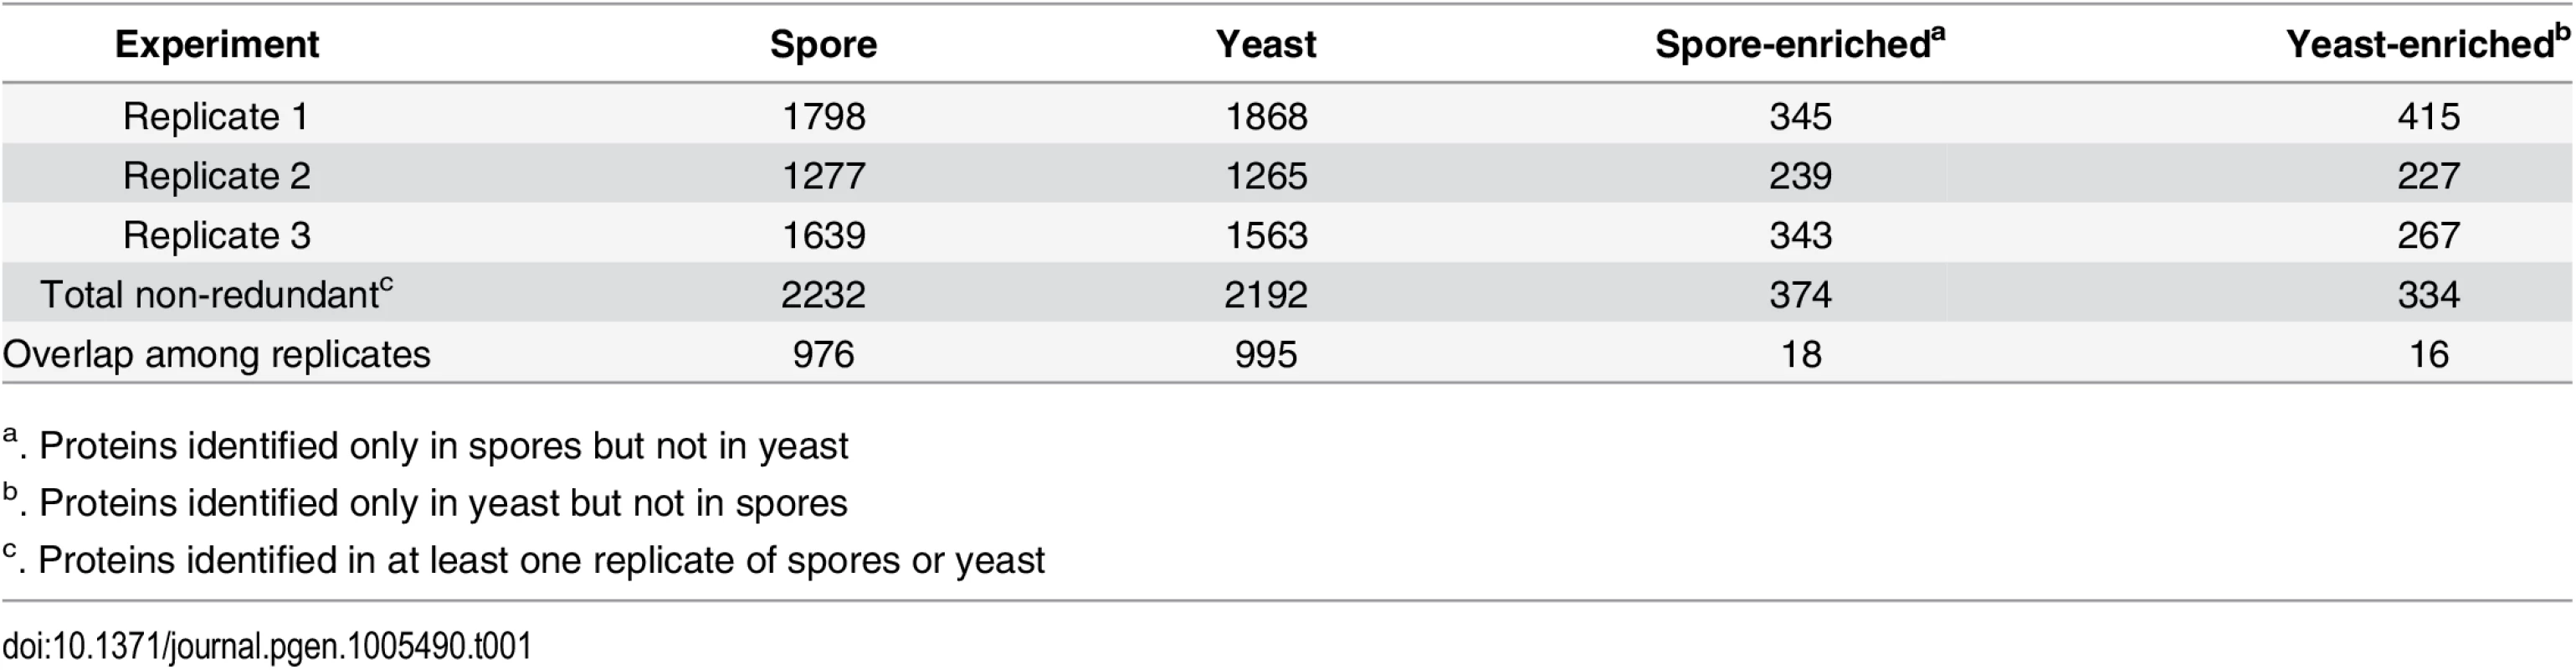 Number of proteins identified in spores and yeast.